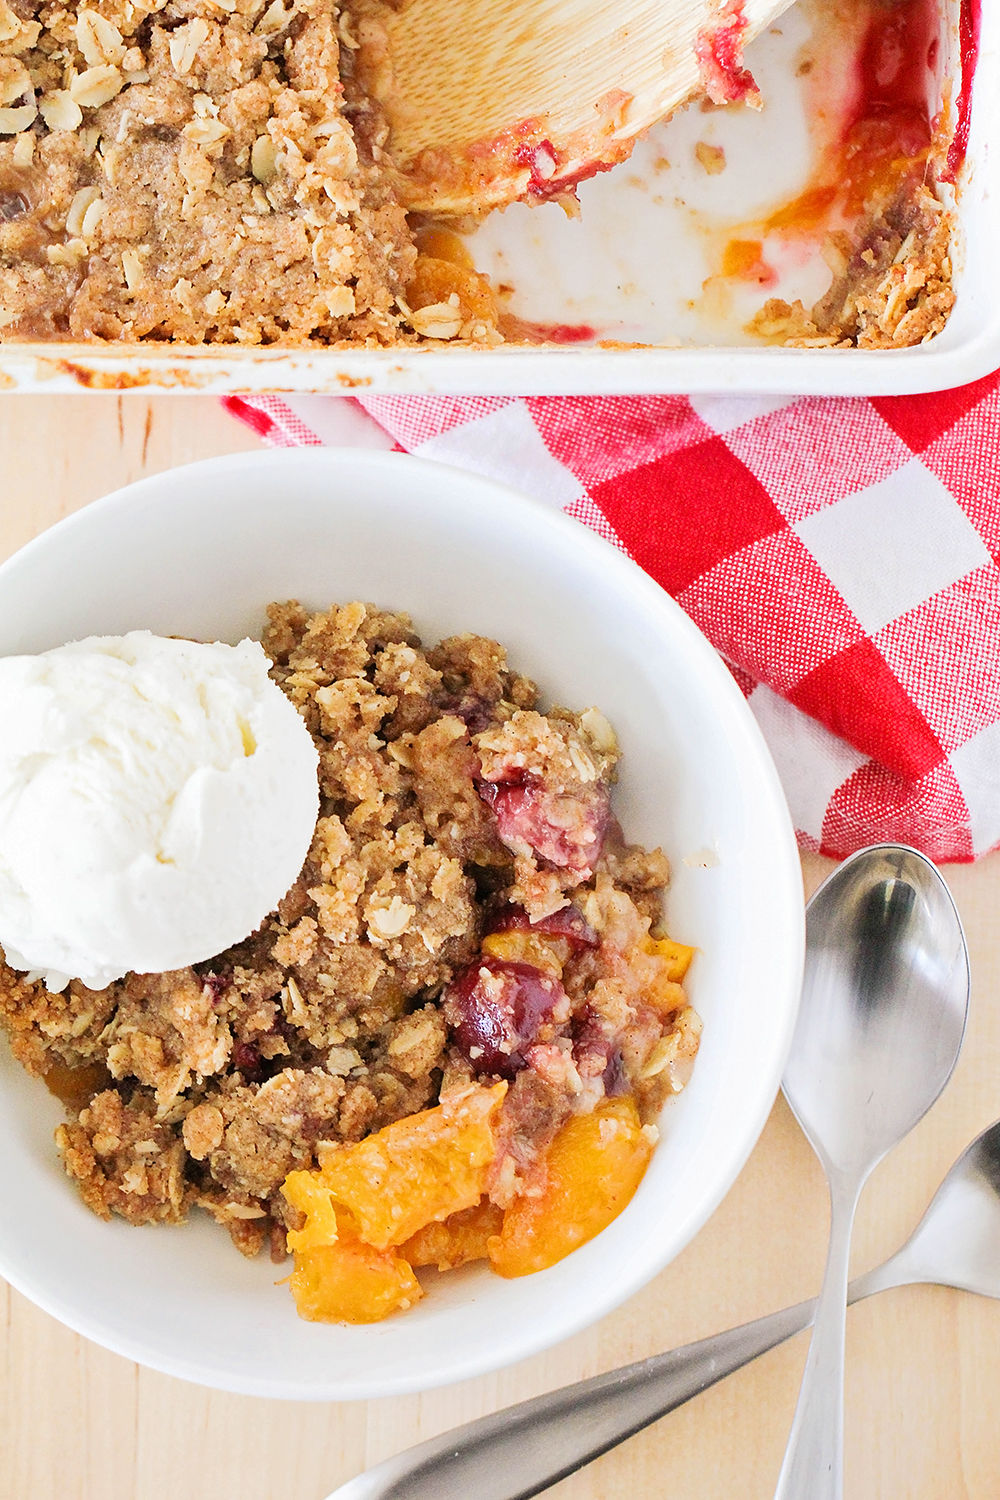 This cherry peach crisp is full of juicy summer fruit, and so easy to make. It's the perfect summer dessert!